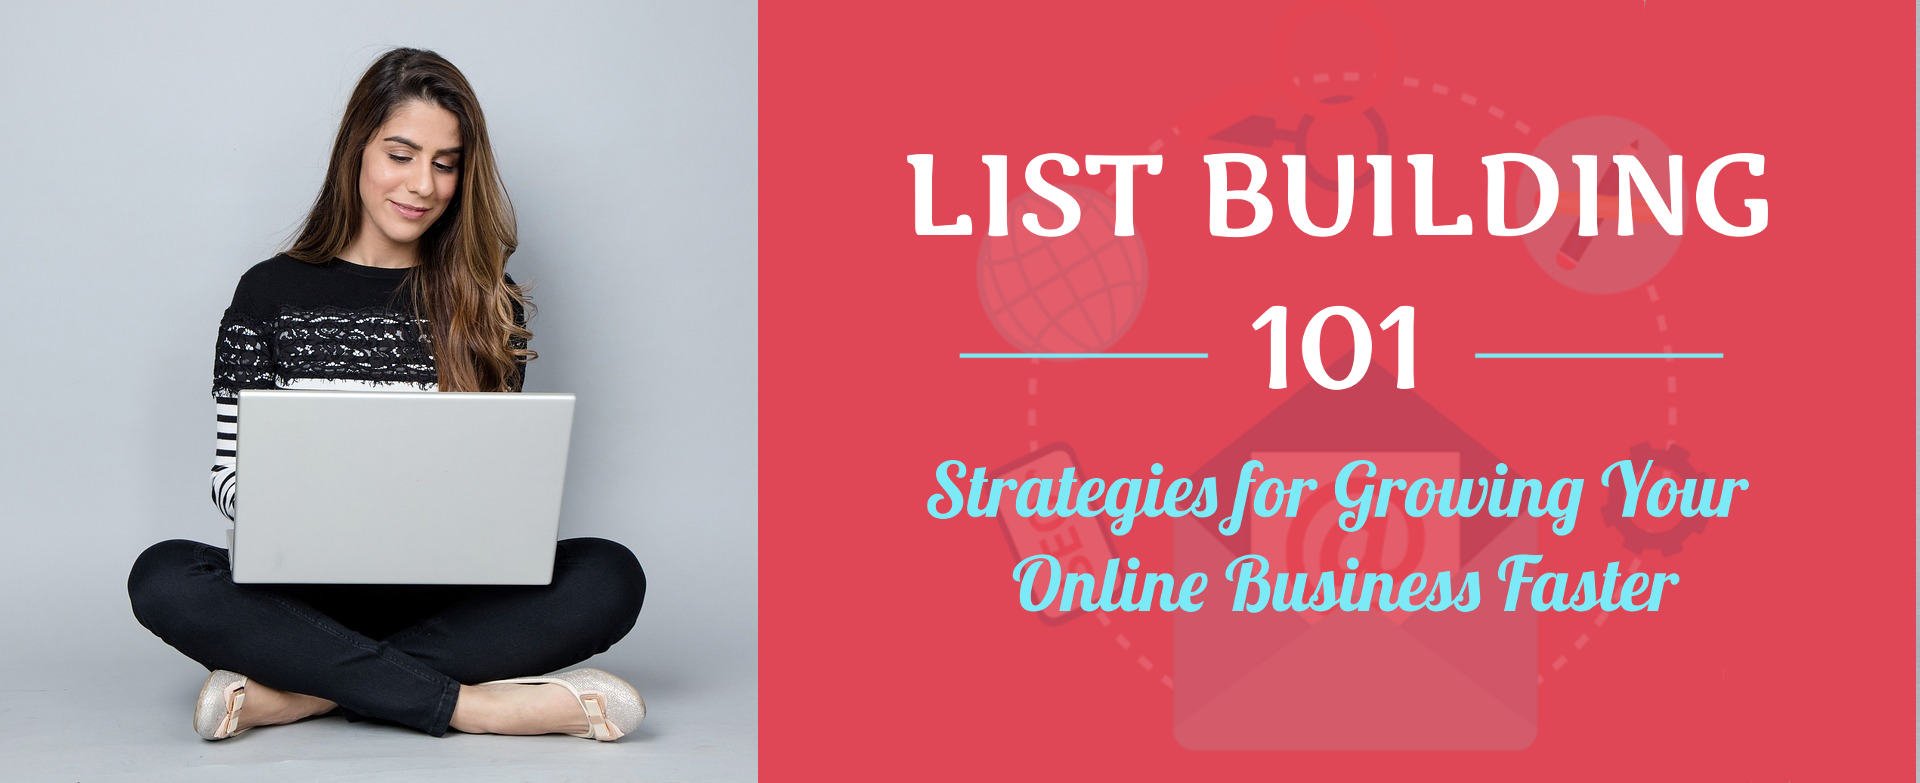 List Building 101 - Strategies for Growing Your Online Business Faster